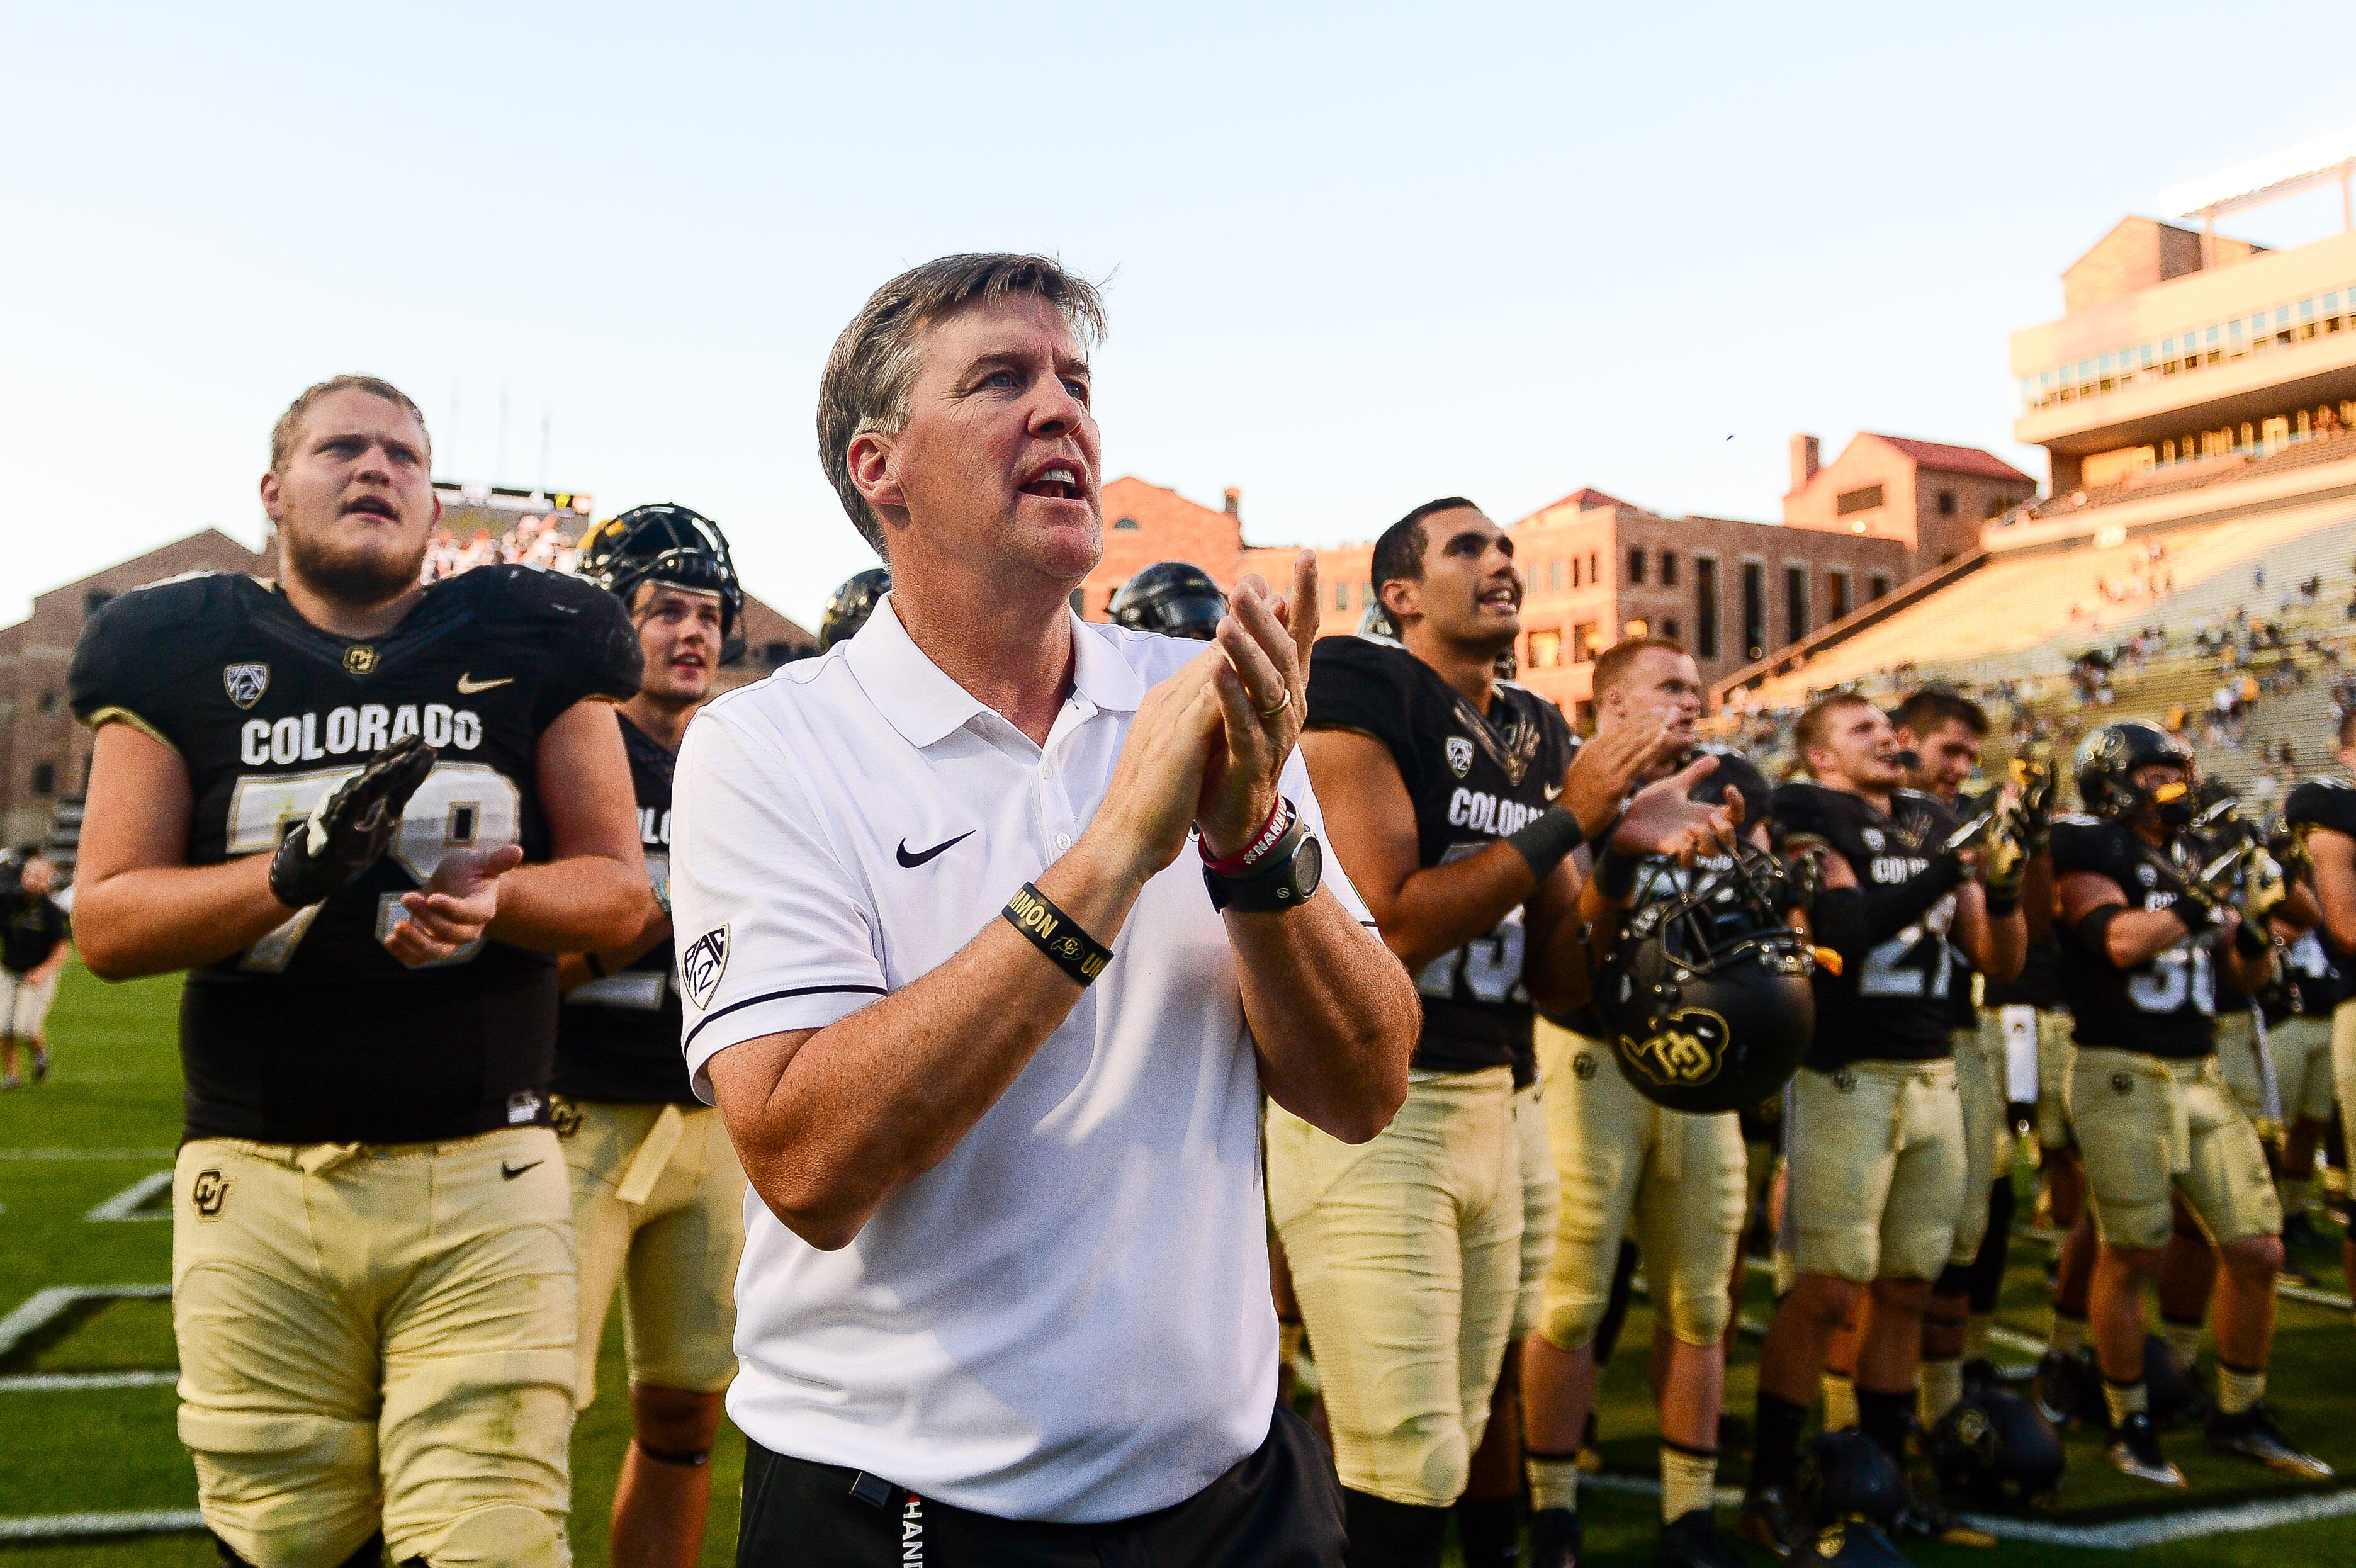 BOULDER, CO - SEPTEMBER 10:  Head Coach Mike MacIntyre of the Colorado Buffaloes sings along with the band and his team after a 56-7 win over the Idaho State Bengals at Folsom Field on September 10, 2016 in Boulder, Colorado.  (Photo by Dustin Bradford/Ge